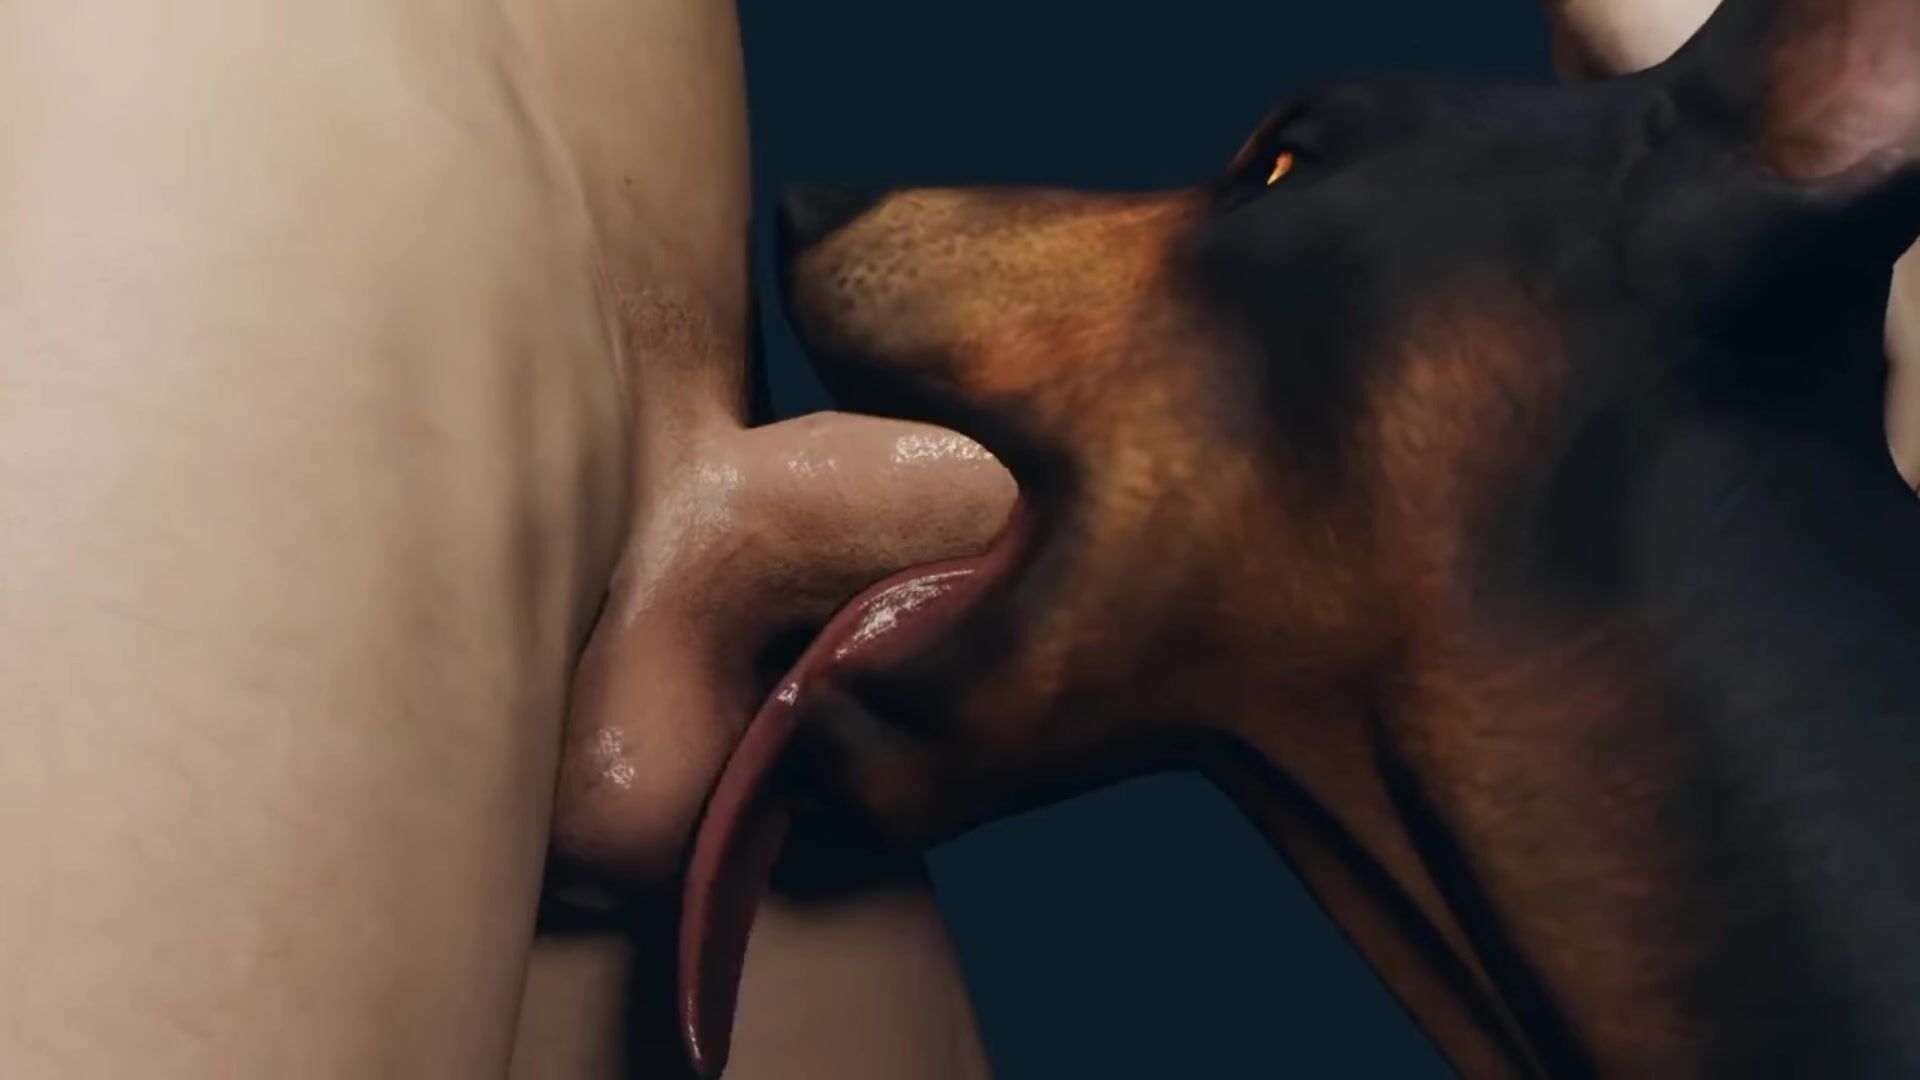 Dogs giving blowjobs